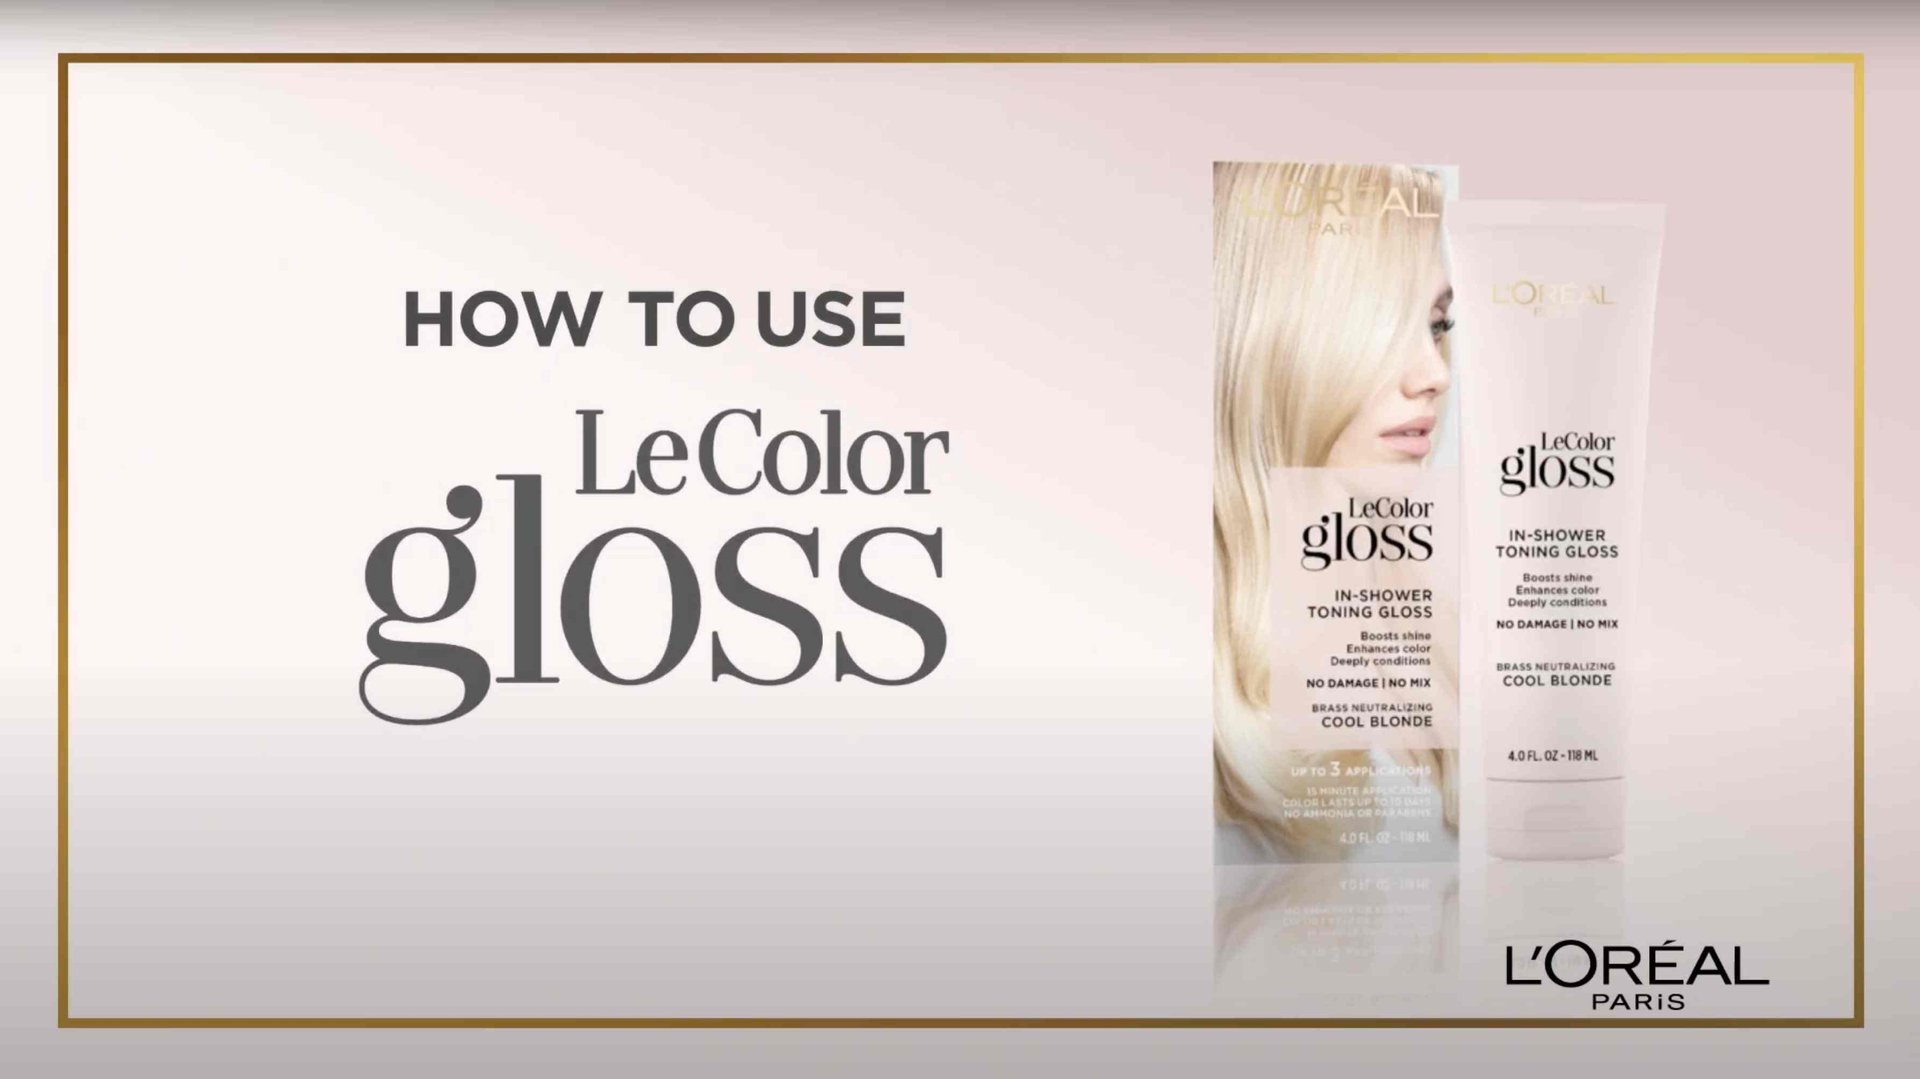 How To Use Le Gloss 2